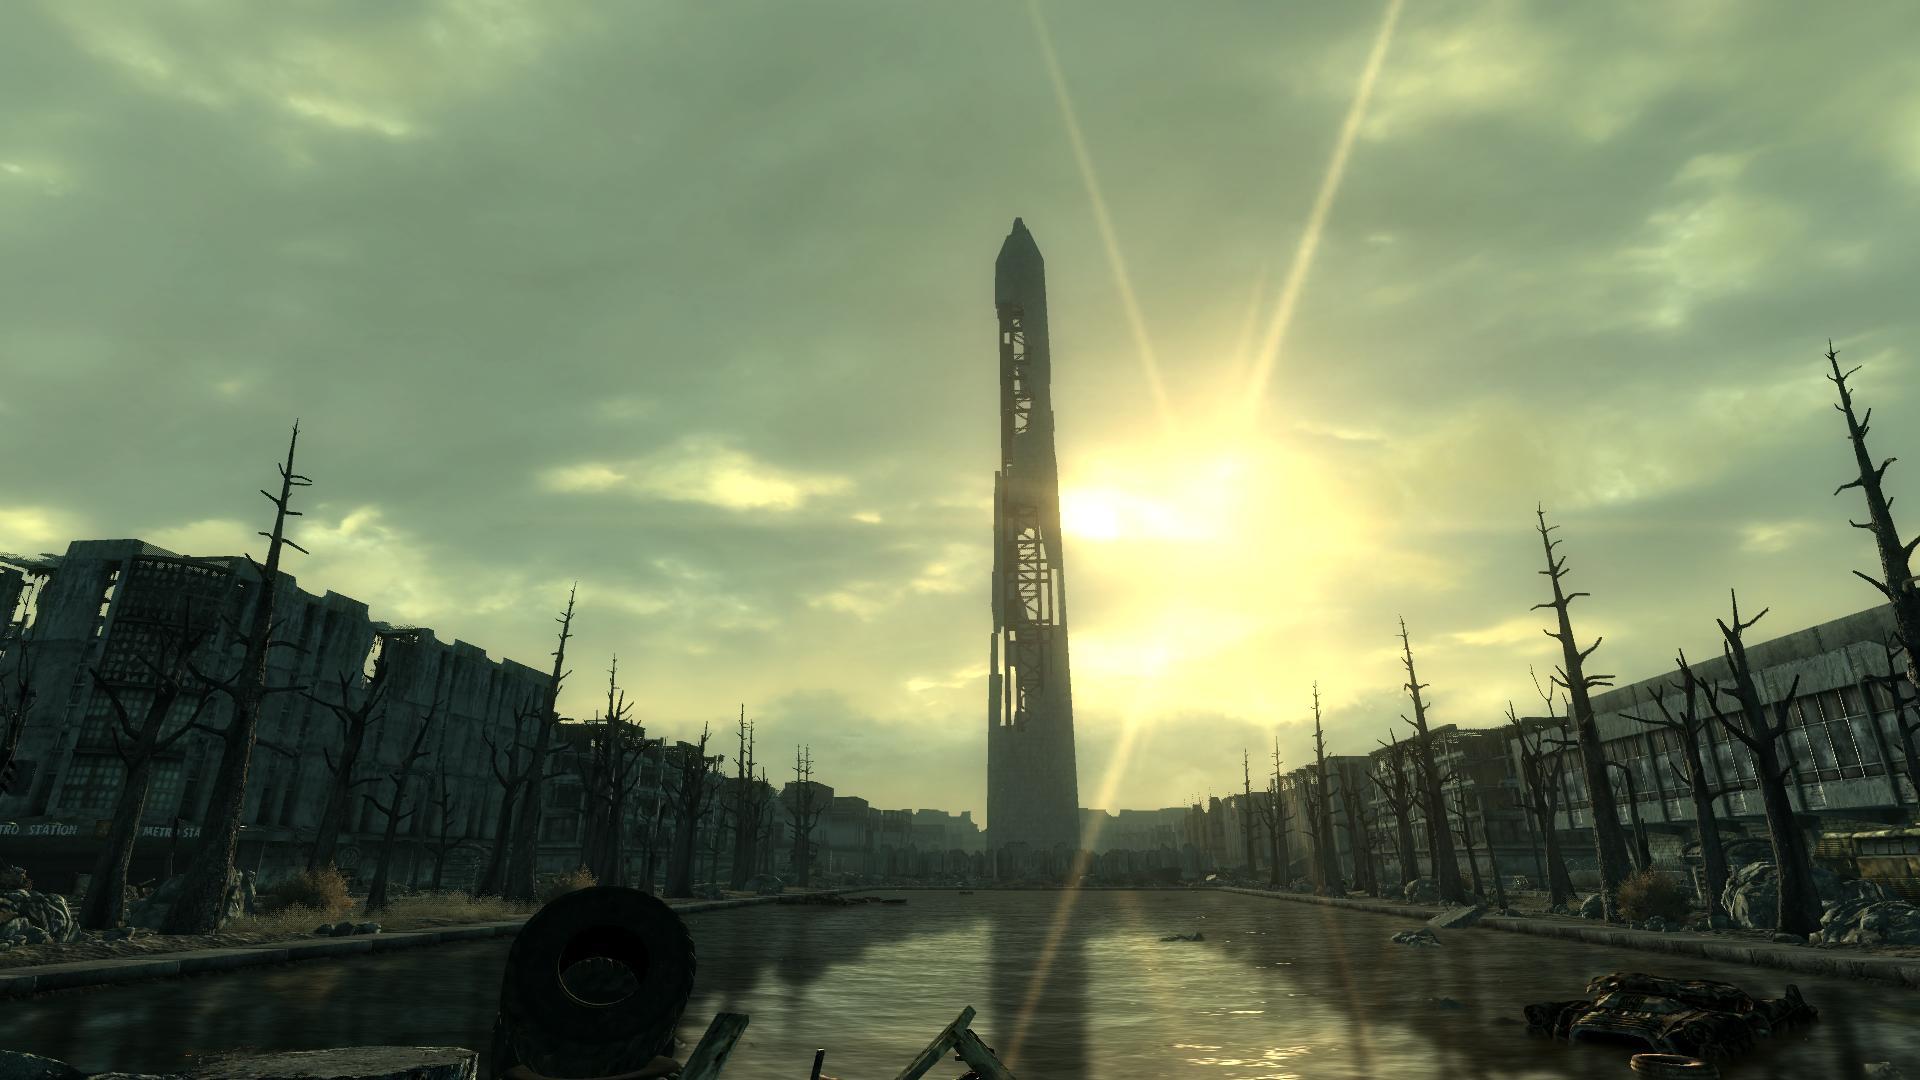 High Definition Collection: Fallout 3 Wallpaper, 34 Full HD Fallout